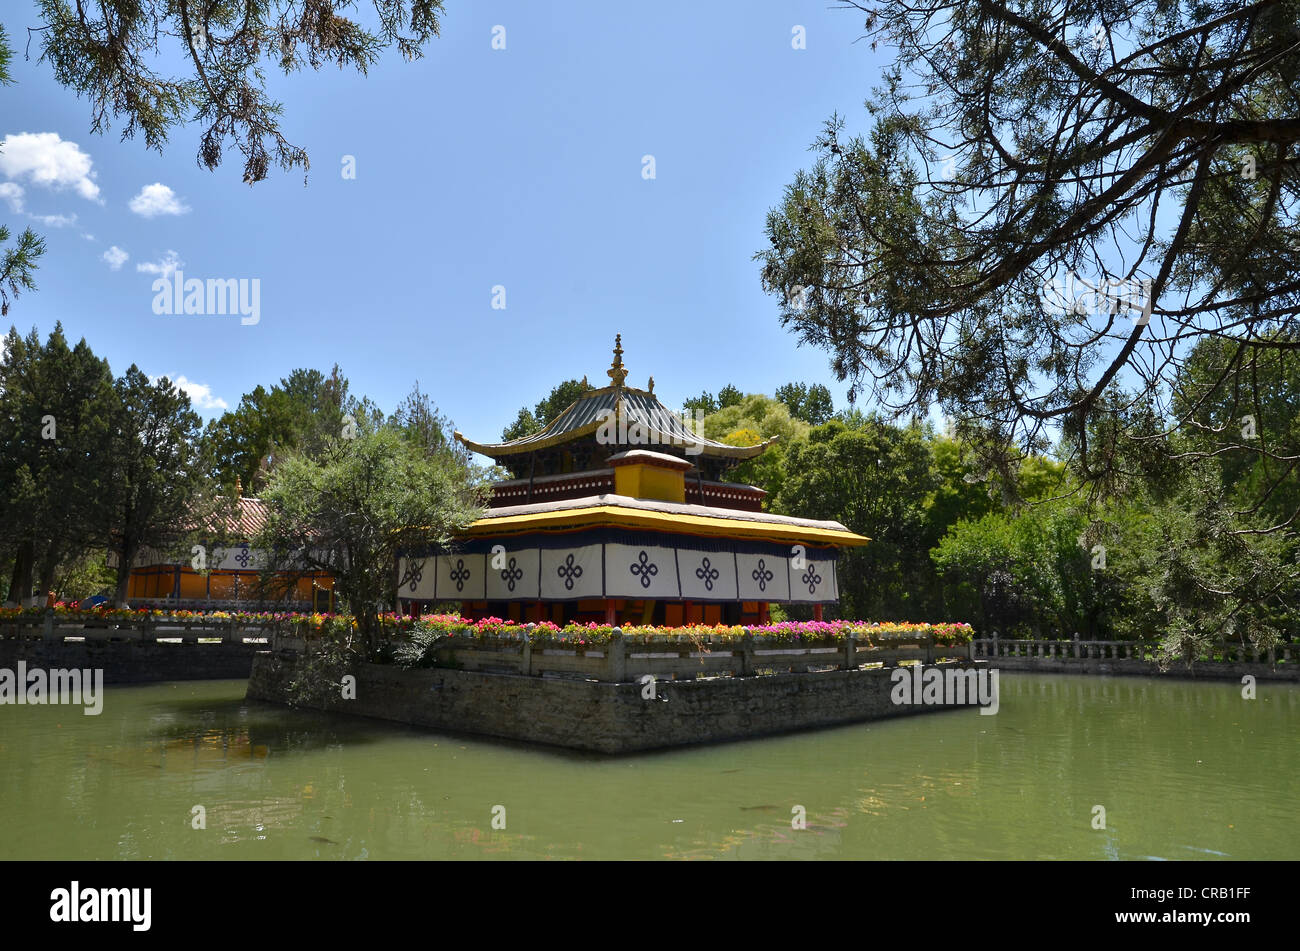 Small building in the centre of a man-made lake in the summer palace of the Dalai Lama in Norbulingka, jewel garden, Lhasa Stock Photo